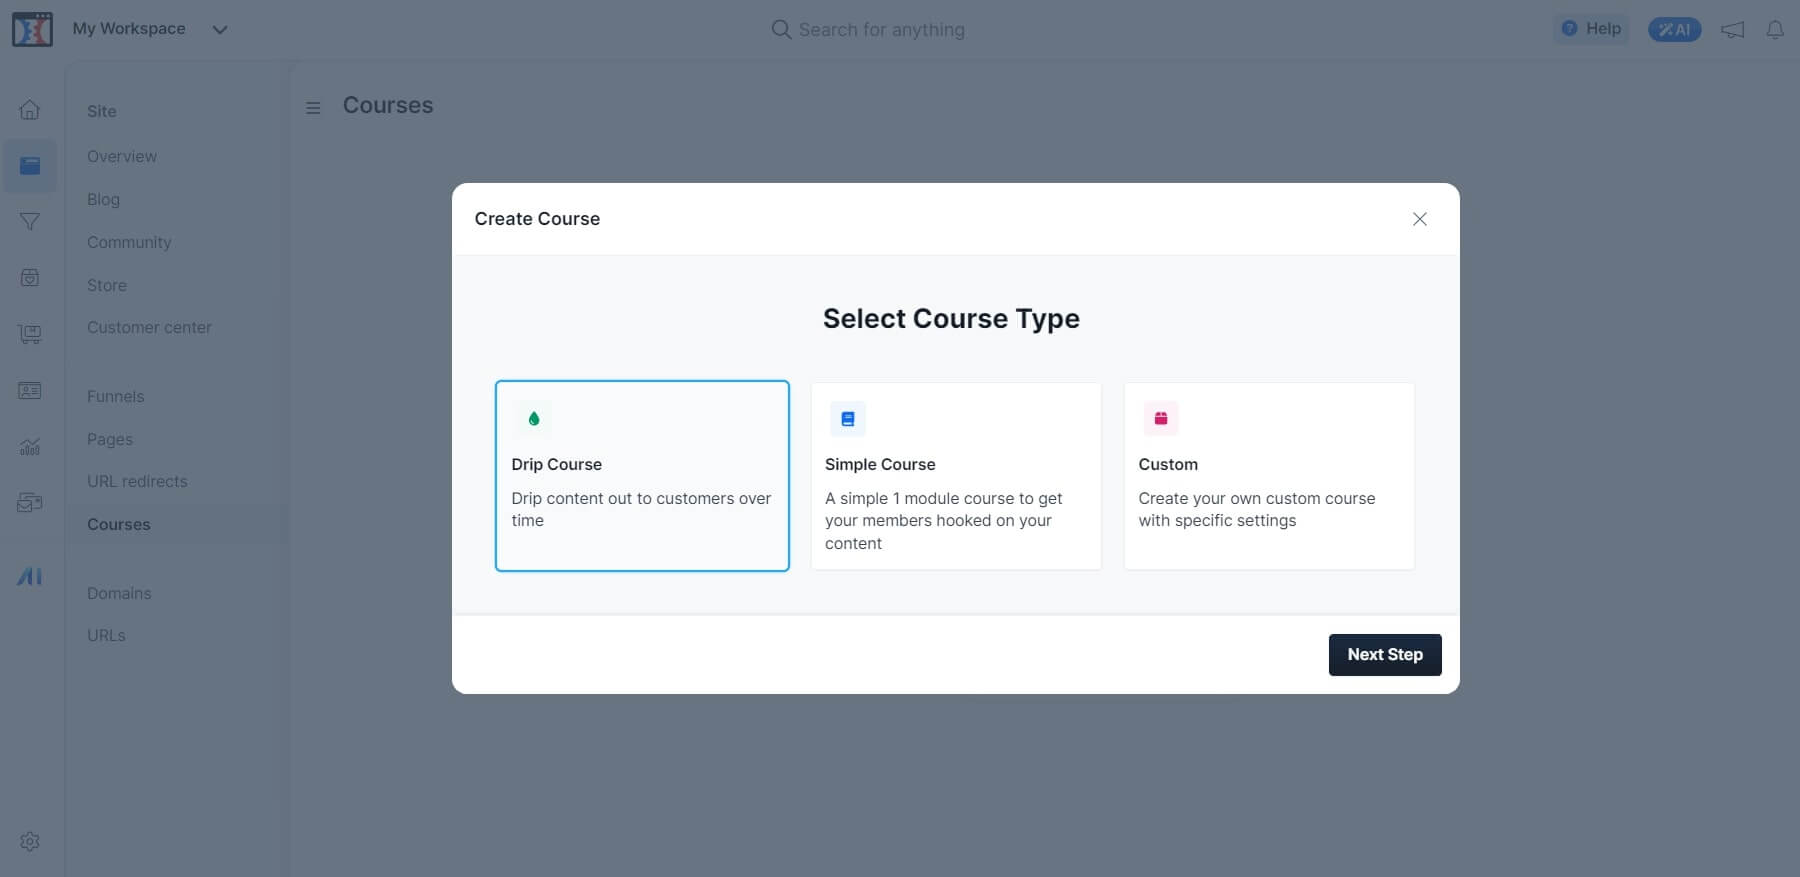 A screenshot showing ClickFunnels' course building and course type selection process.